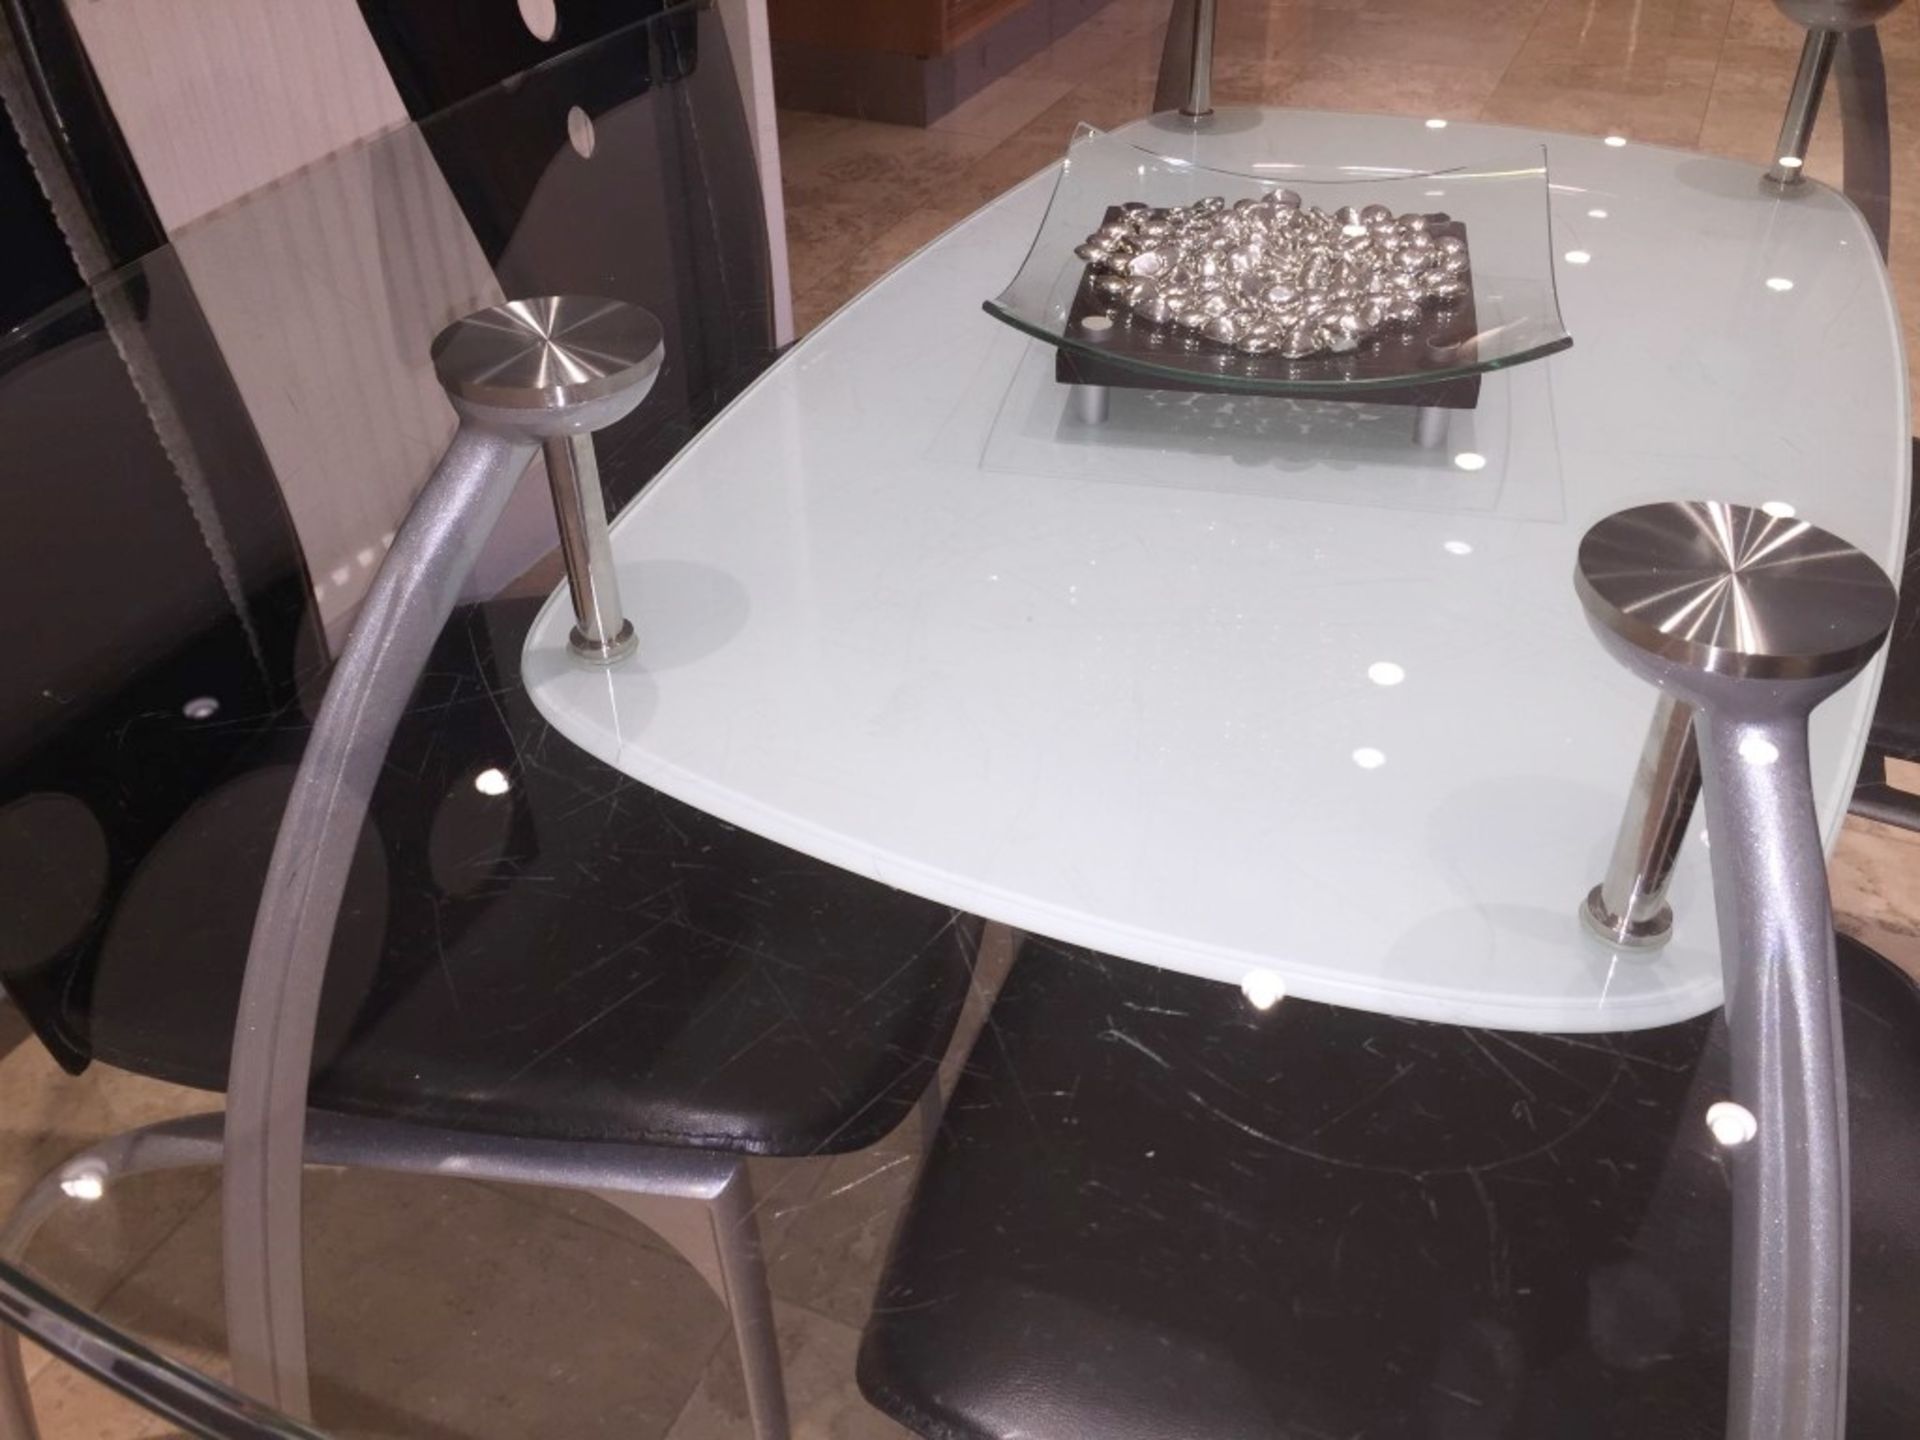 1 x Designer Glass-topped Dining Table And Chairs - Dimensions: 150cm x 84cm x Height 75cm Pls 4 - Image 5 of 5